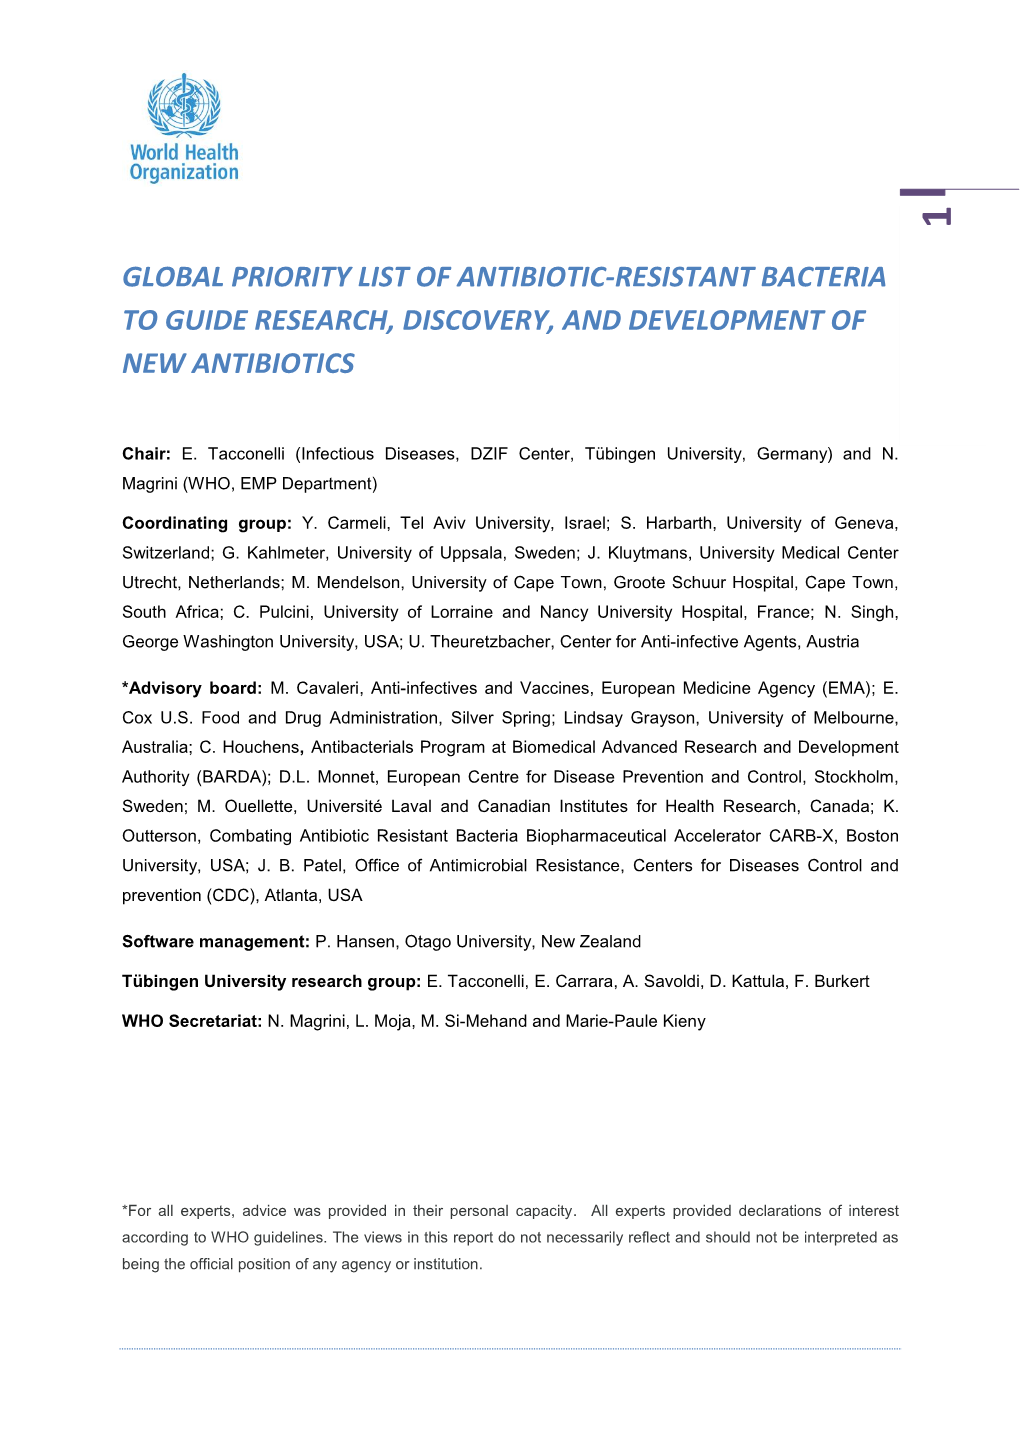 Global Priority List of Antibiotic-Resistant Bacteria to Guide Research, Discovery, and Development of New Antibiotics